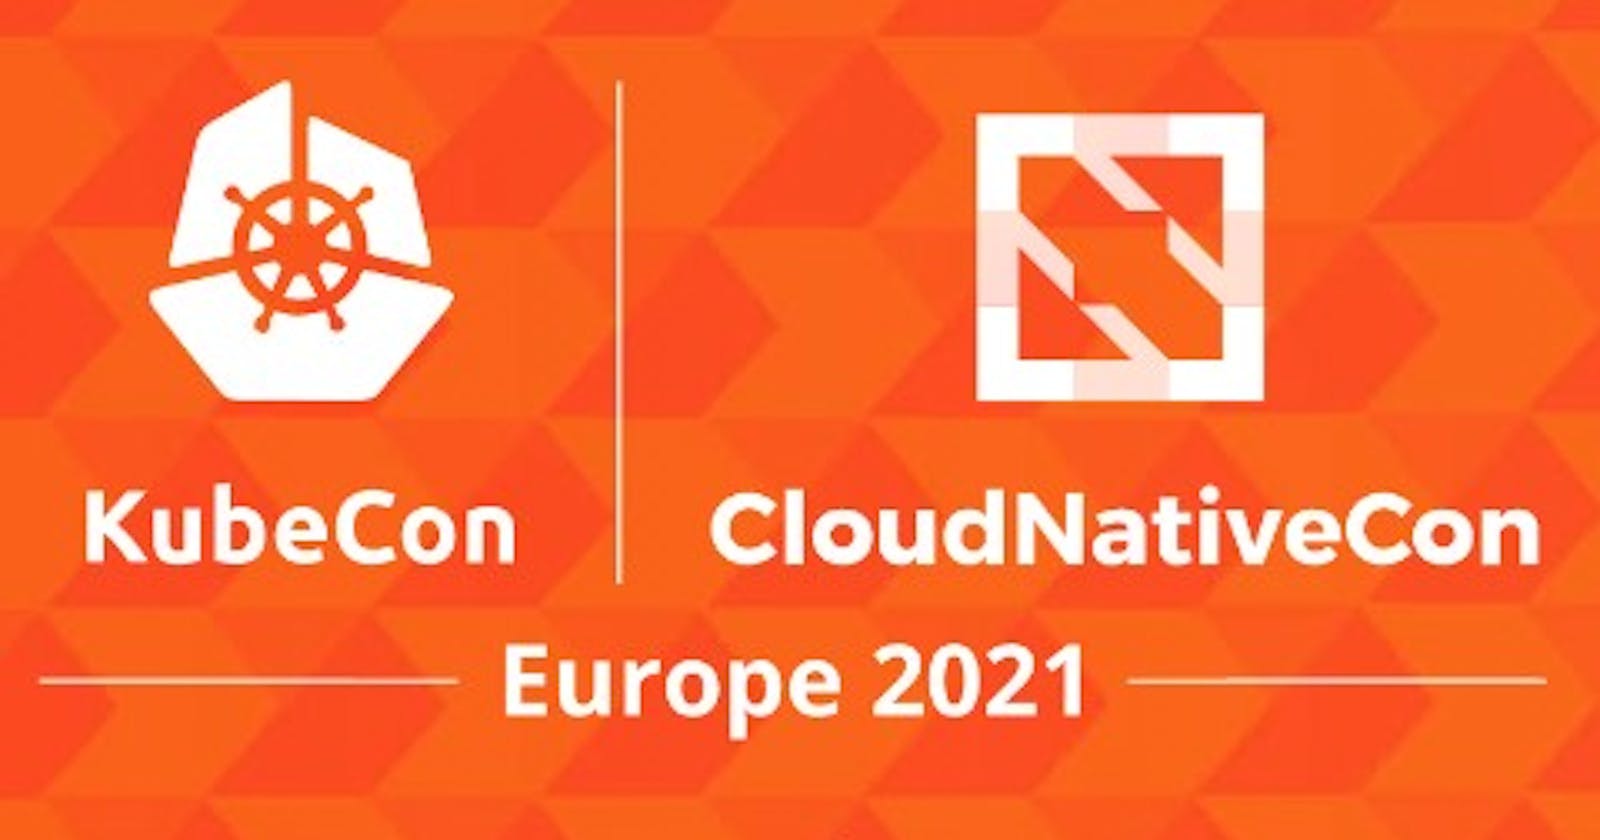 My first time experience at KubeCon+CloudNativeCon EU